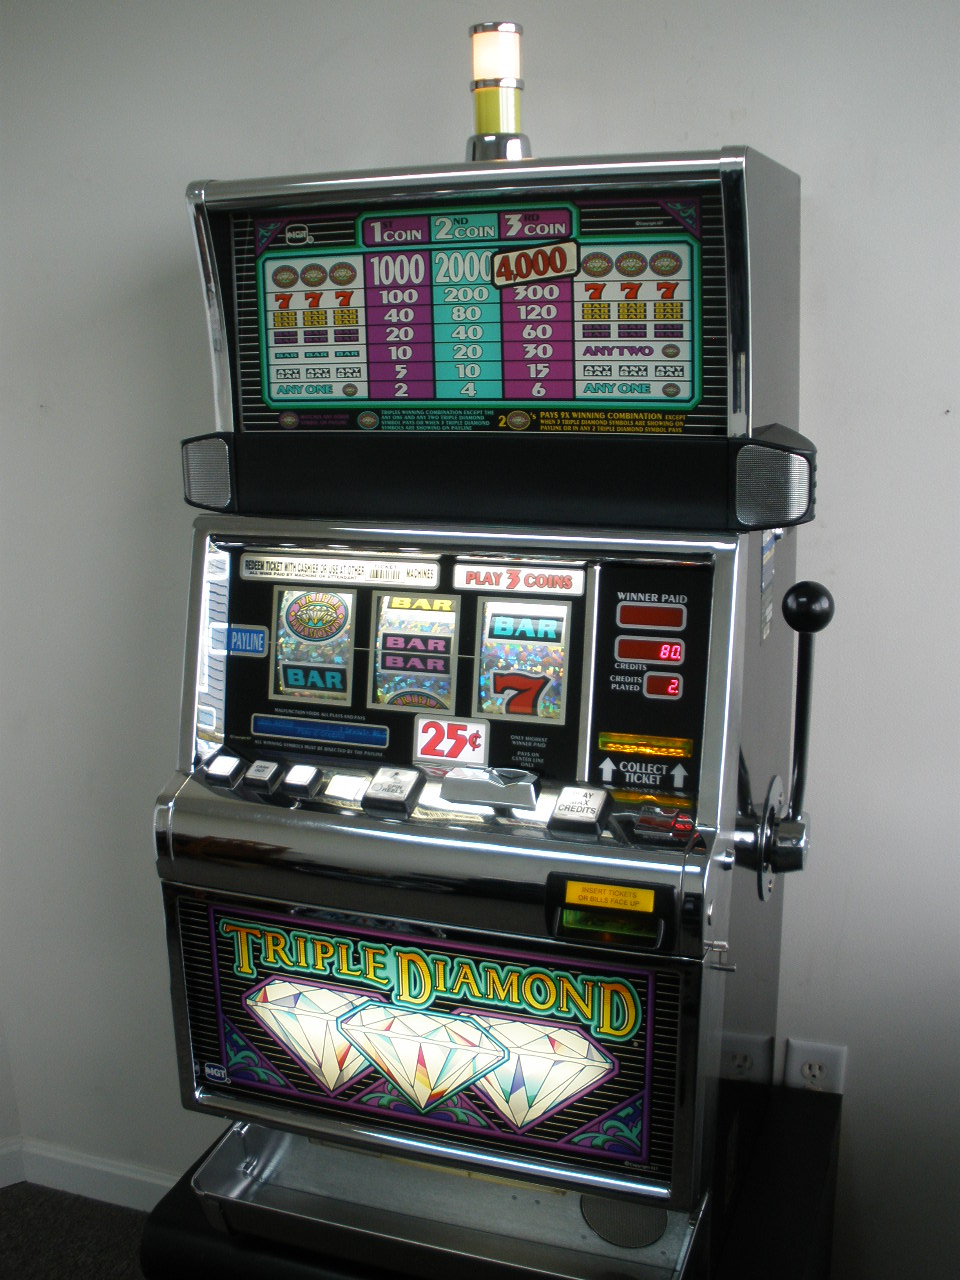 IGT TRIPLE DIAMOND S2000 SLOT MACHINE WITH QUARTER COIN HANDLING - THREE COIN For Sale • Gambler ...